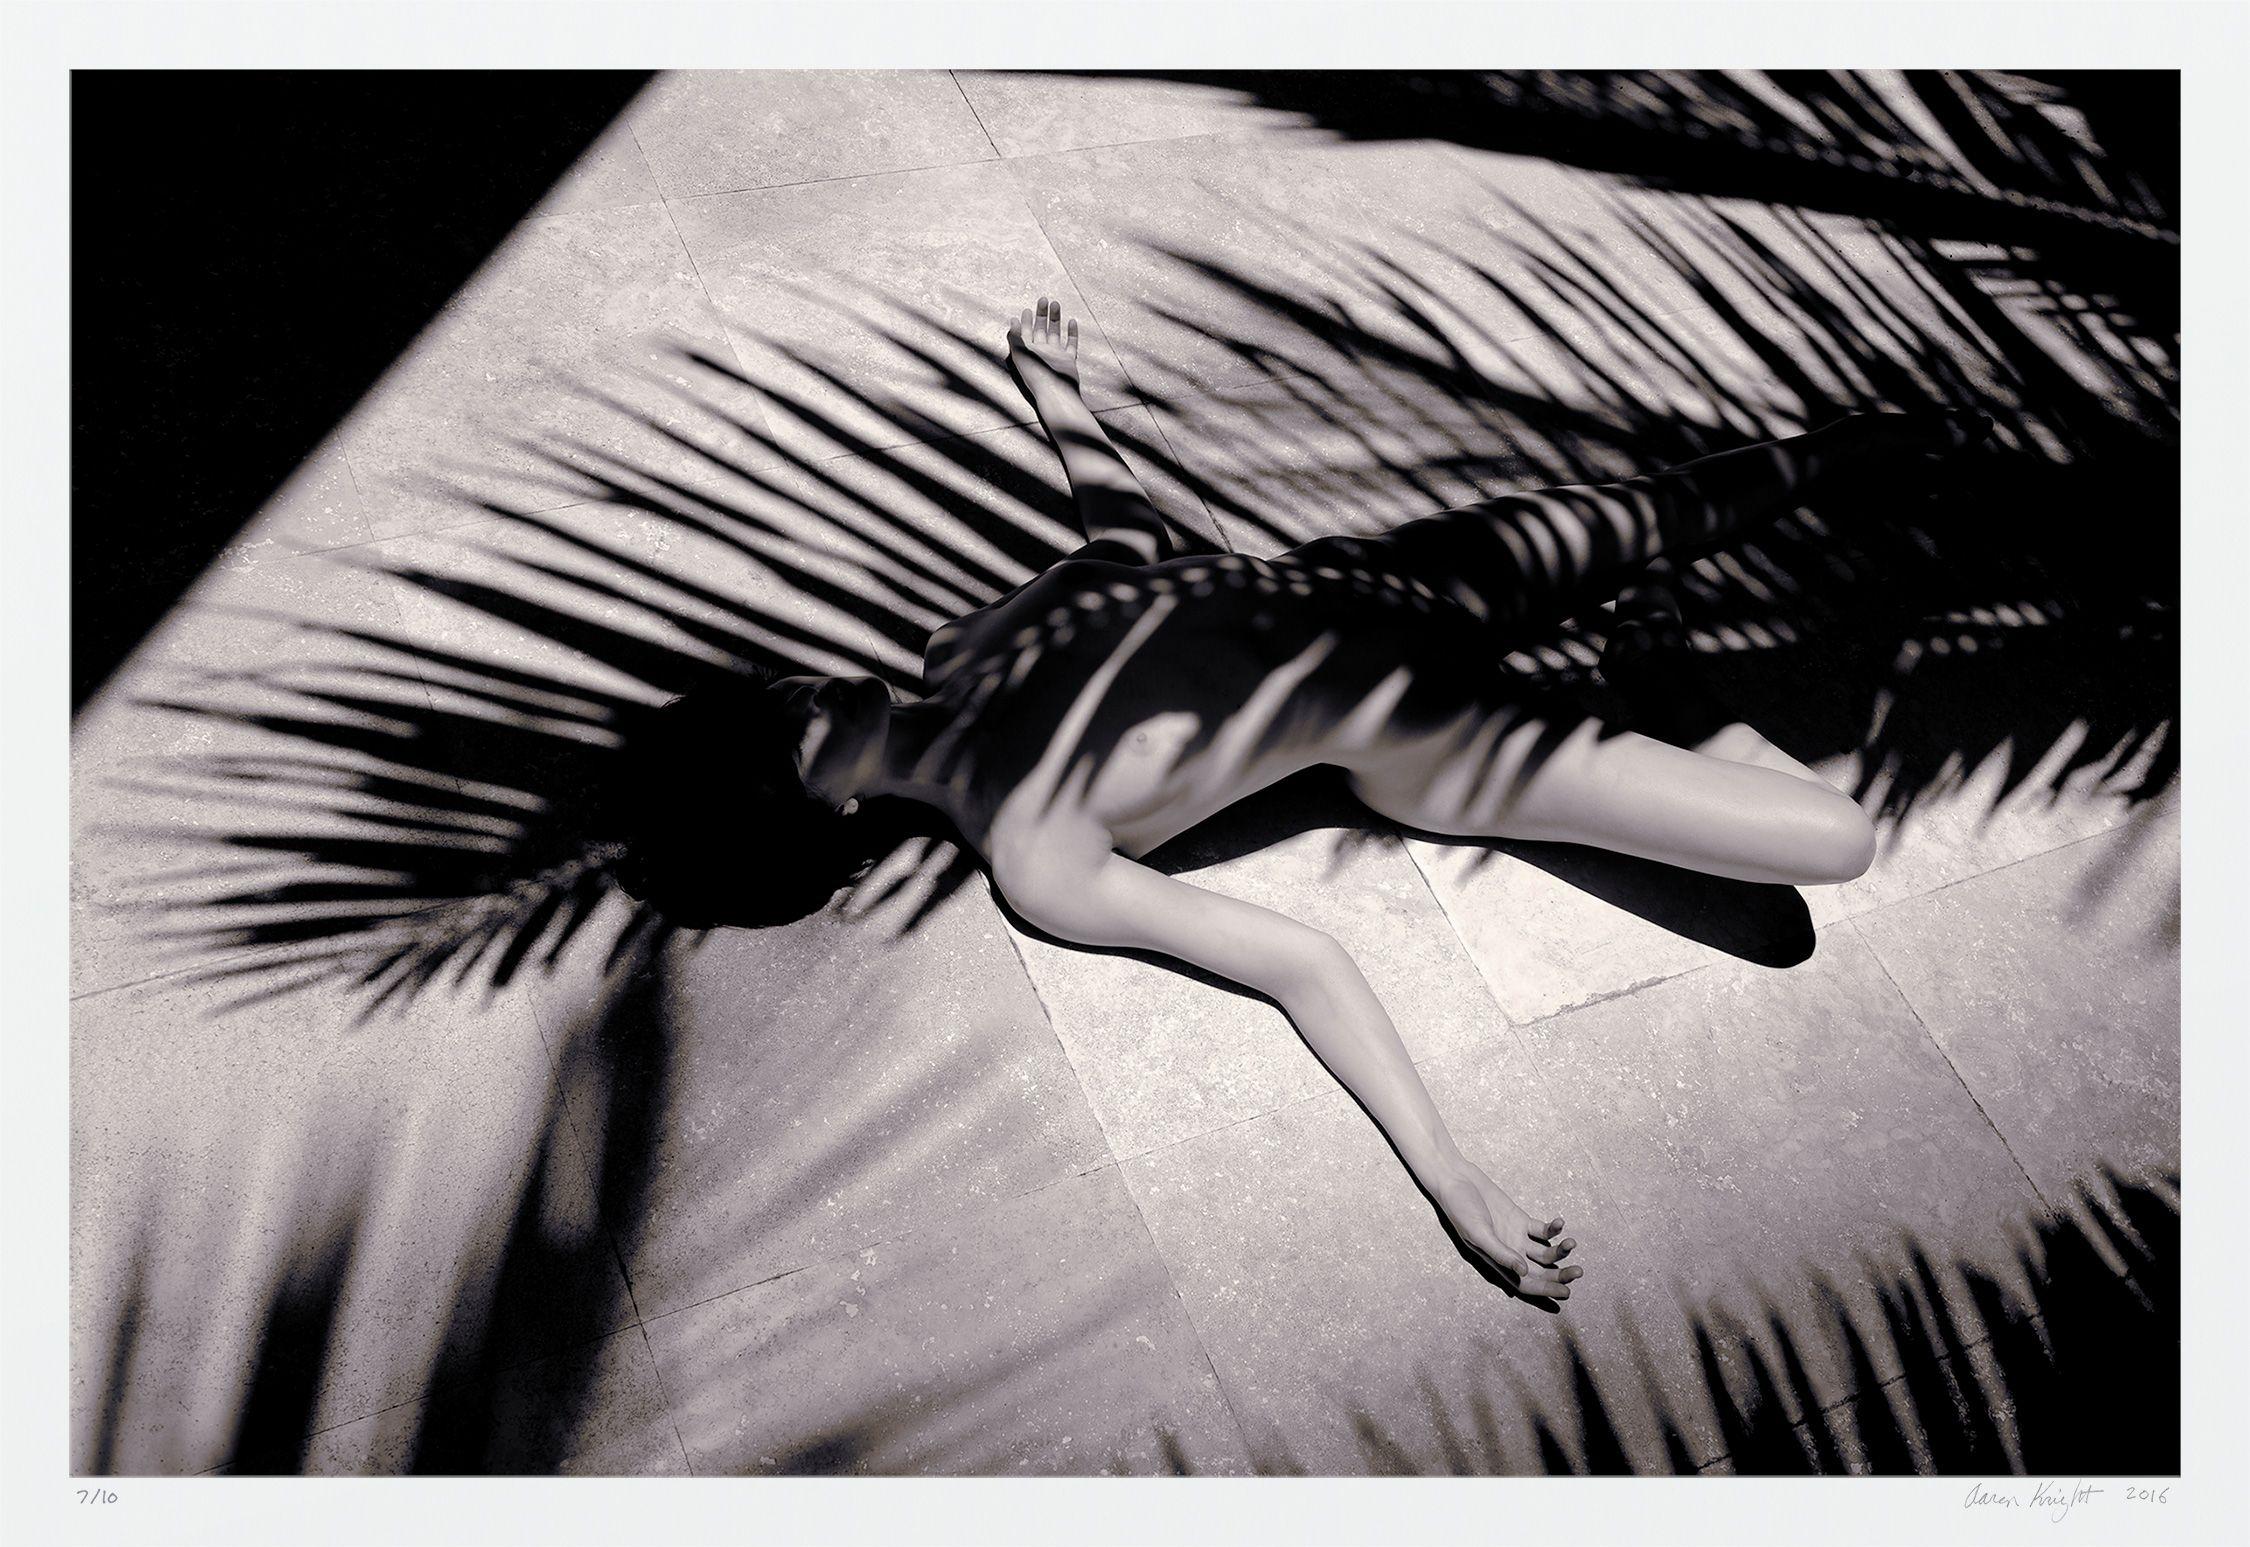 Aaron Knight Black and White Photograph - Arecales Umbra Femina 6/10, Photograph, Archival Ink Jet